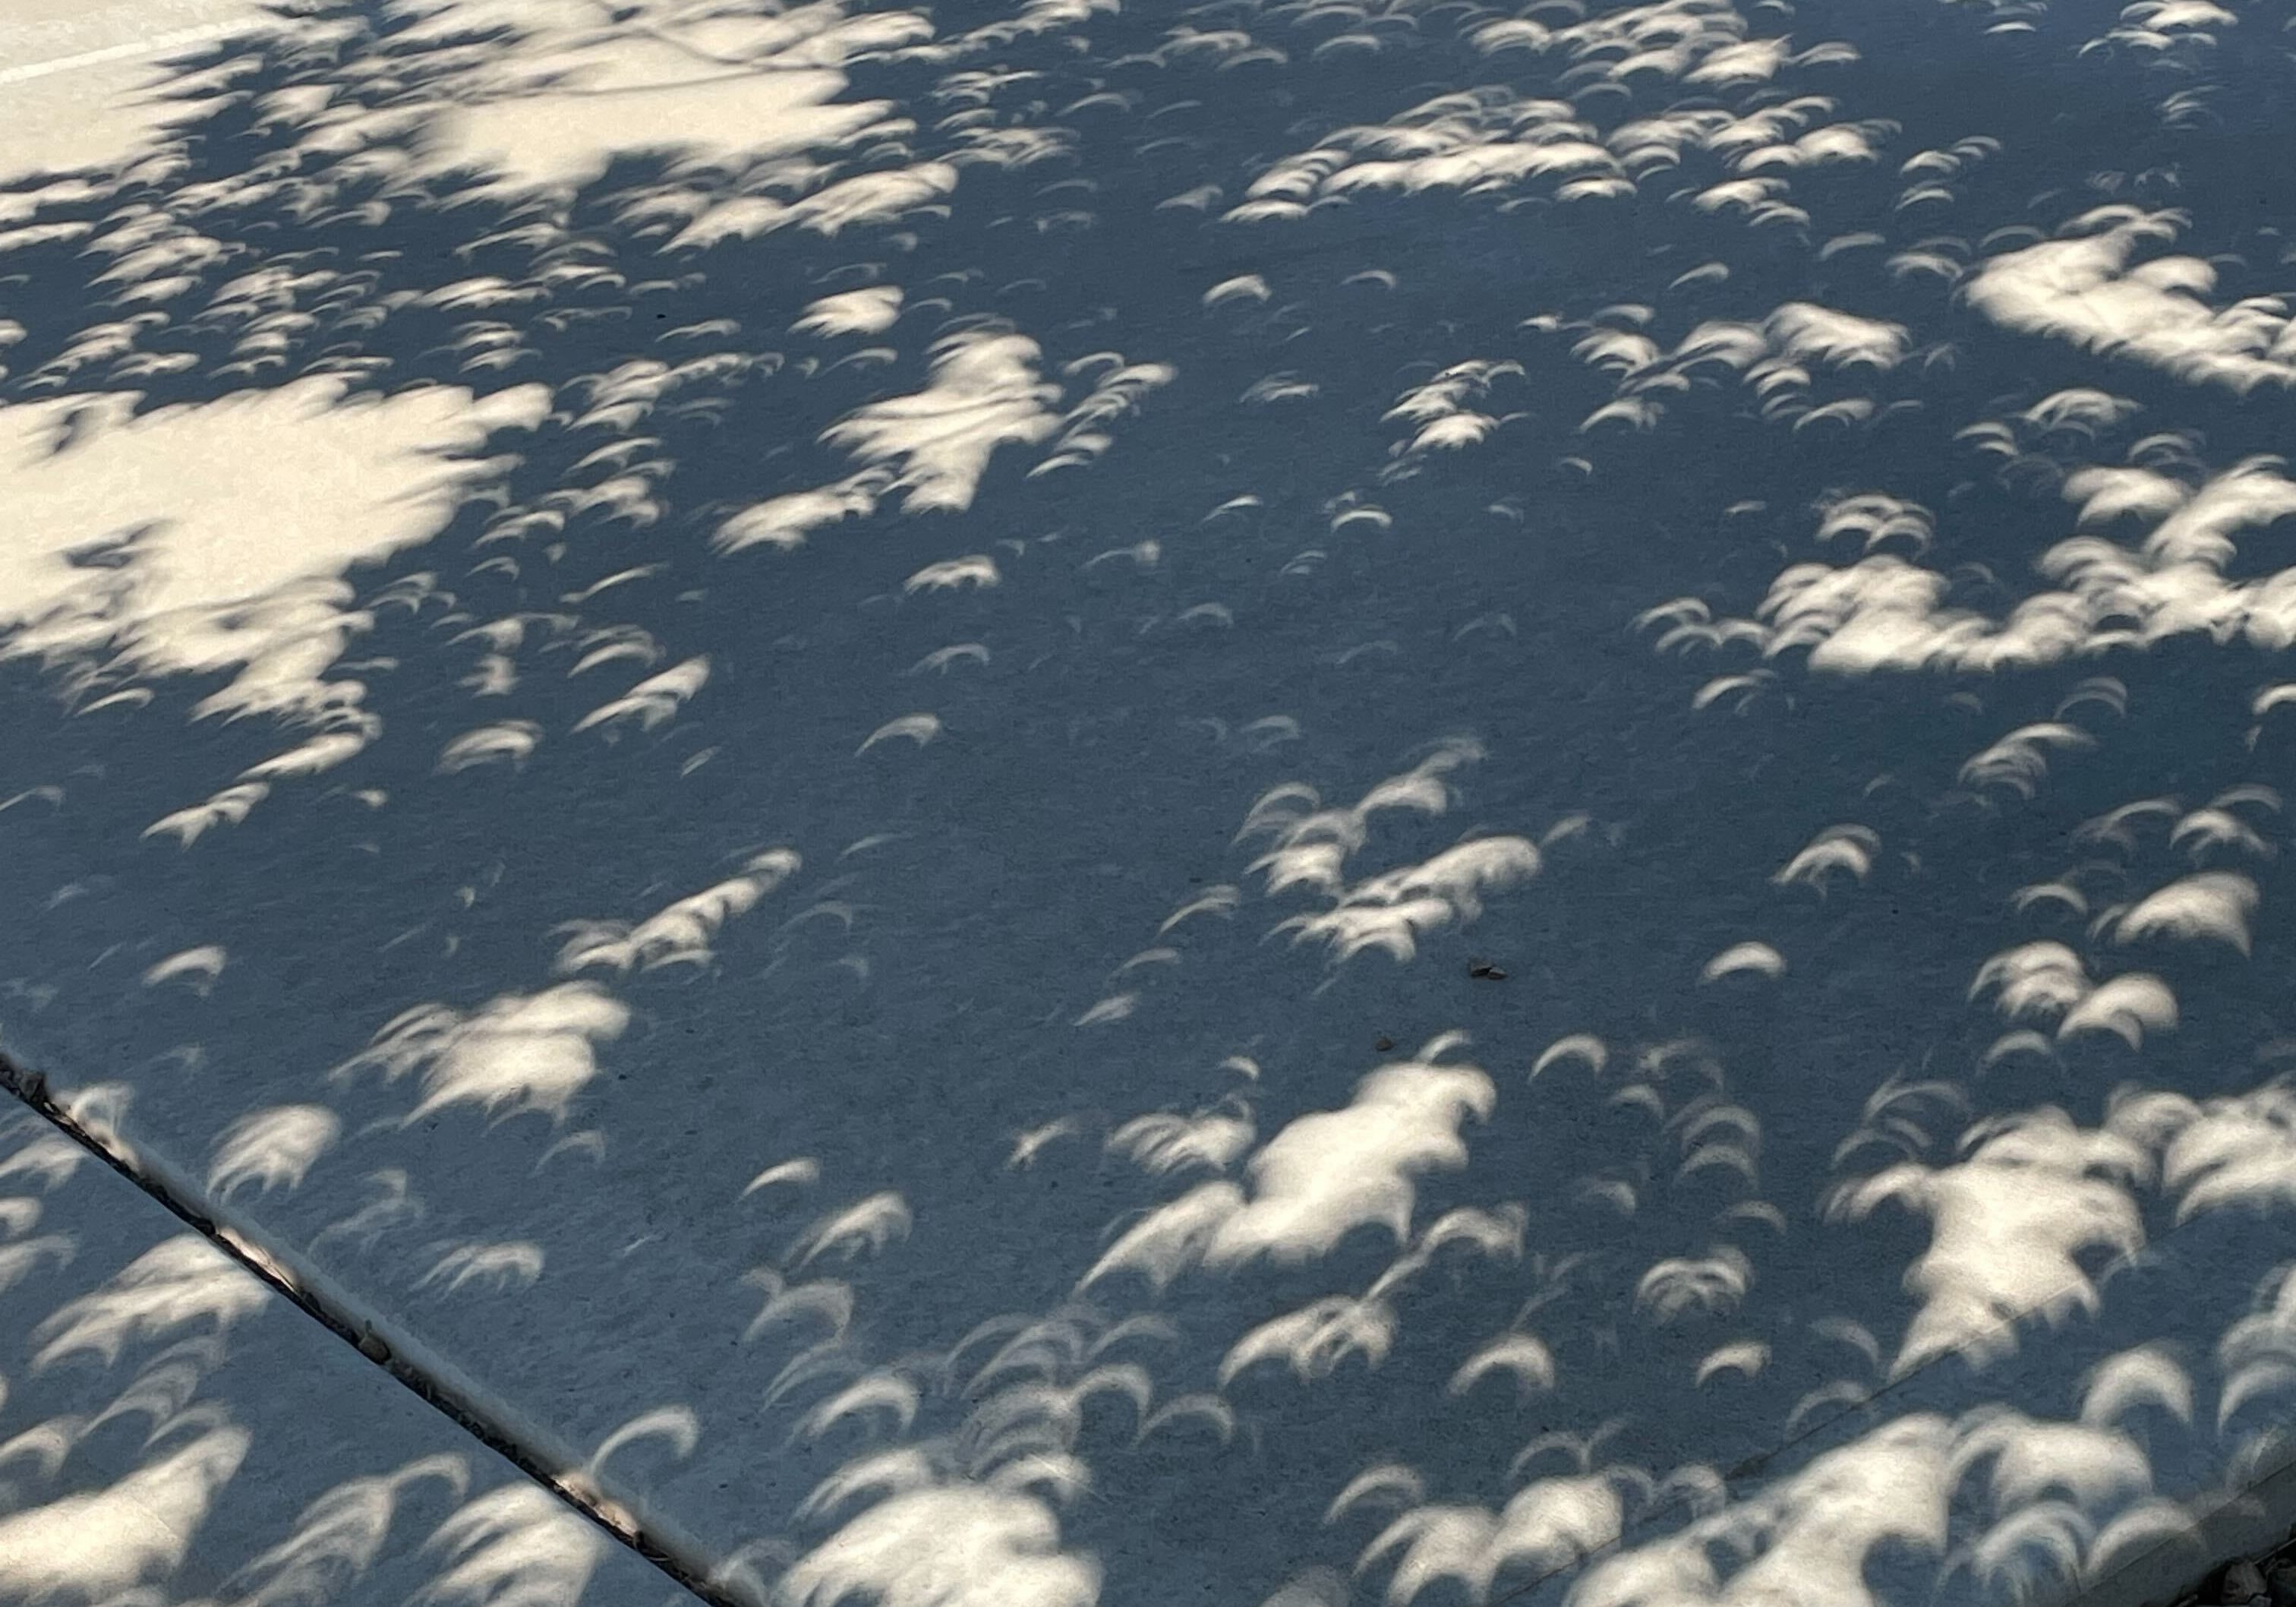 Shadows of the eclipse are seen on a sidewalk. The are like bright thin crescents scattered across the sidewalk.